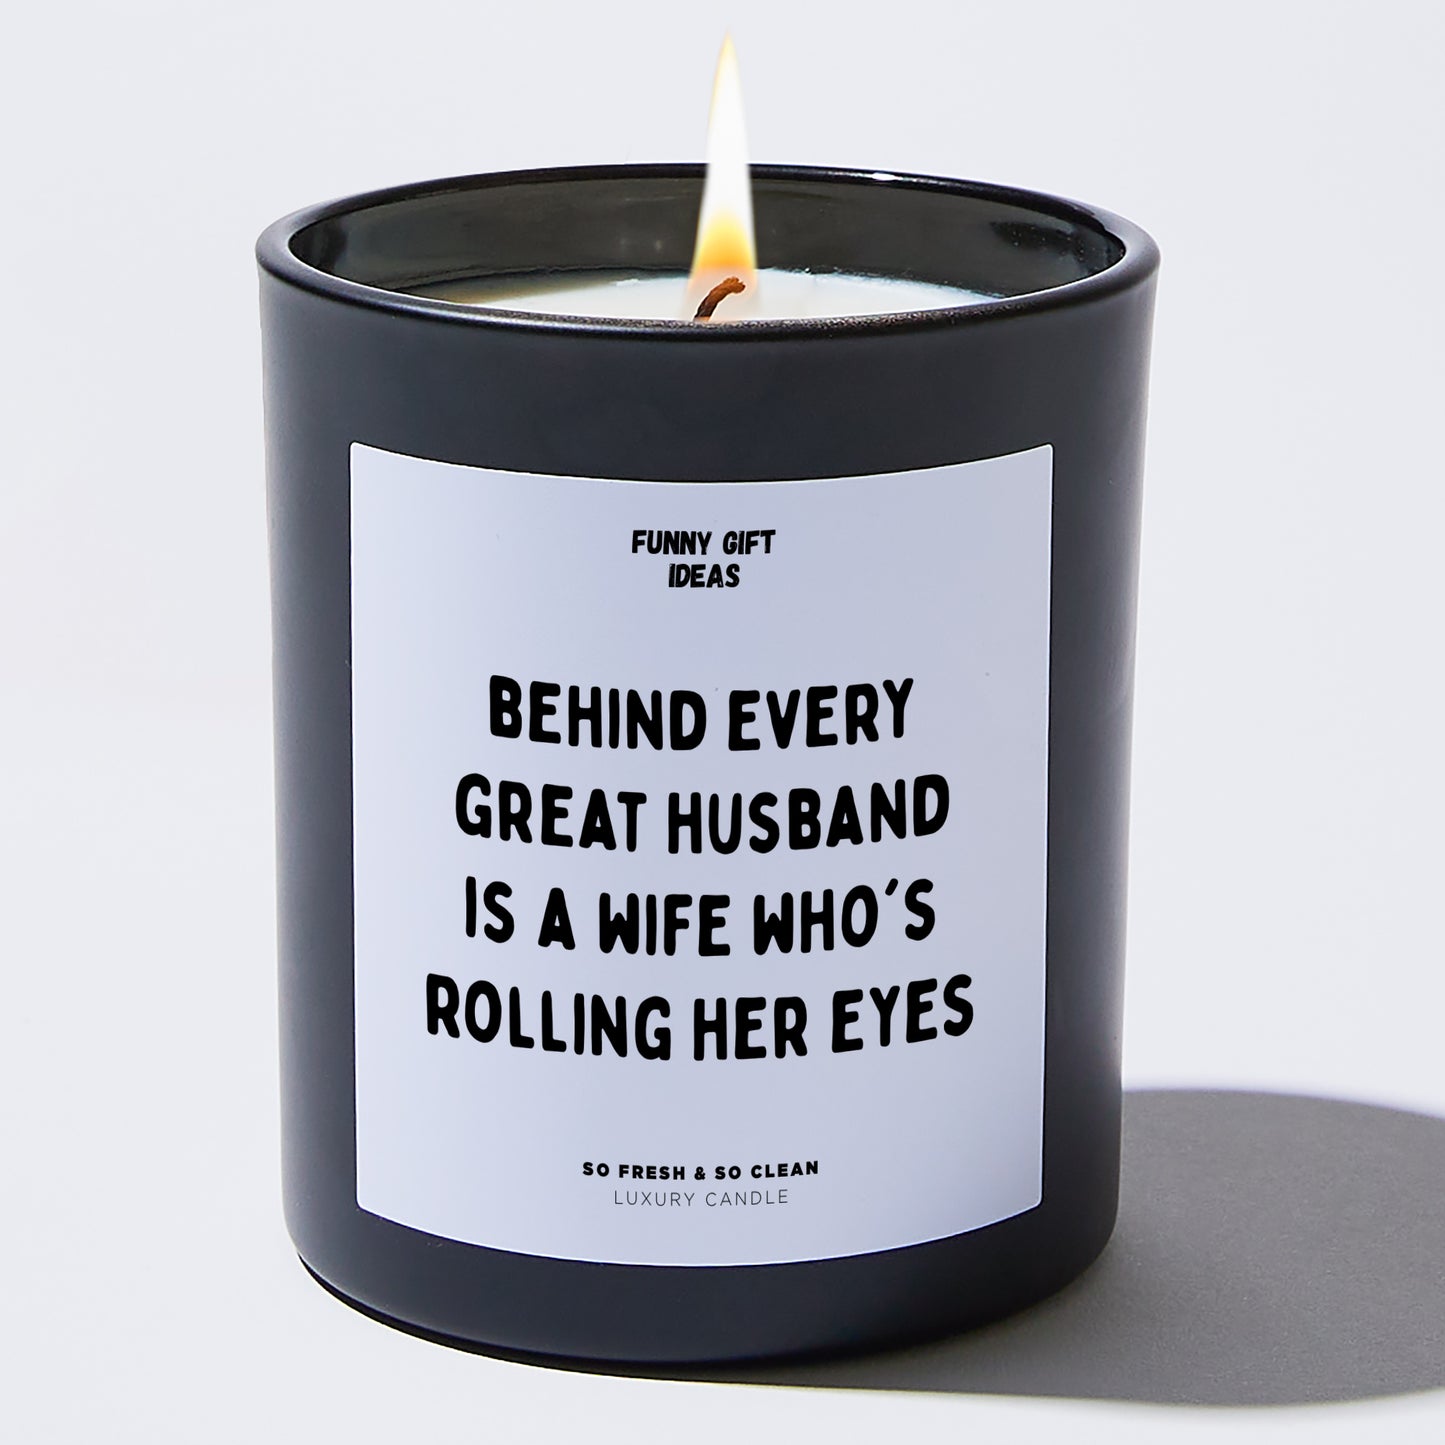 Anniversary Present - Behind Every Great Husband is a Wife Who's Rolling Her Eyes. - Candle